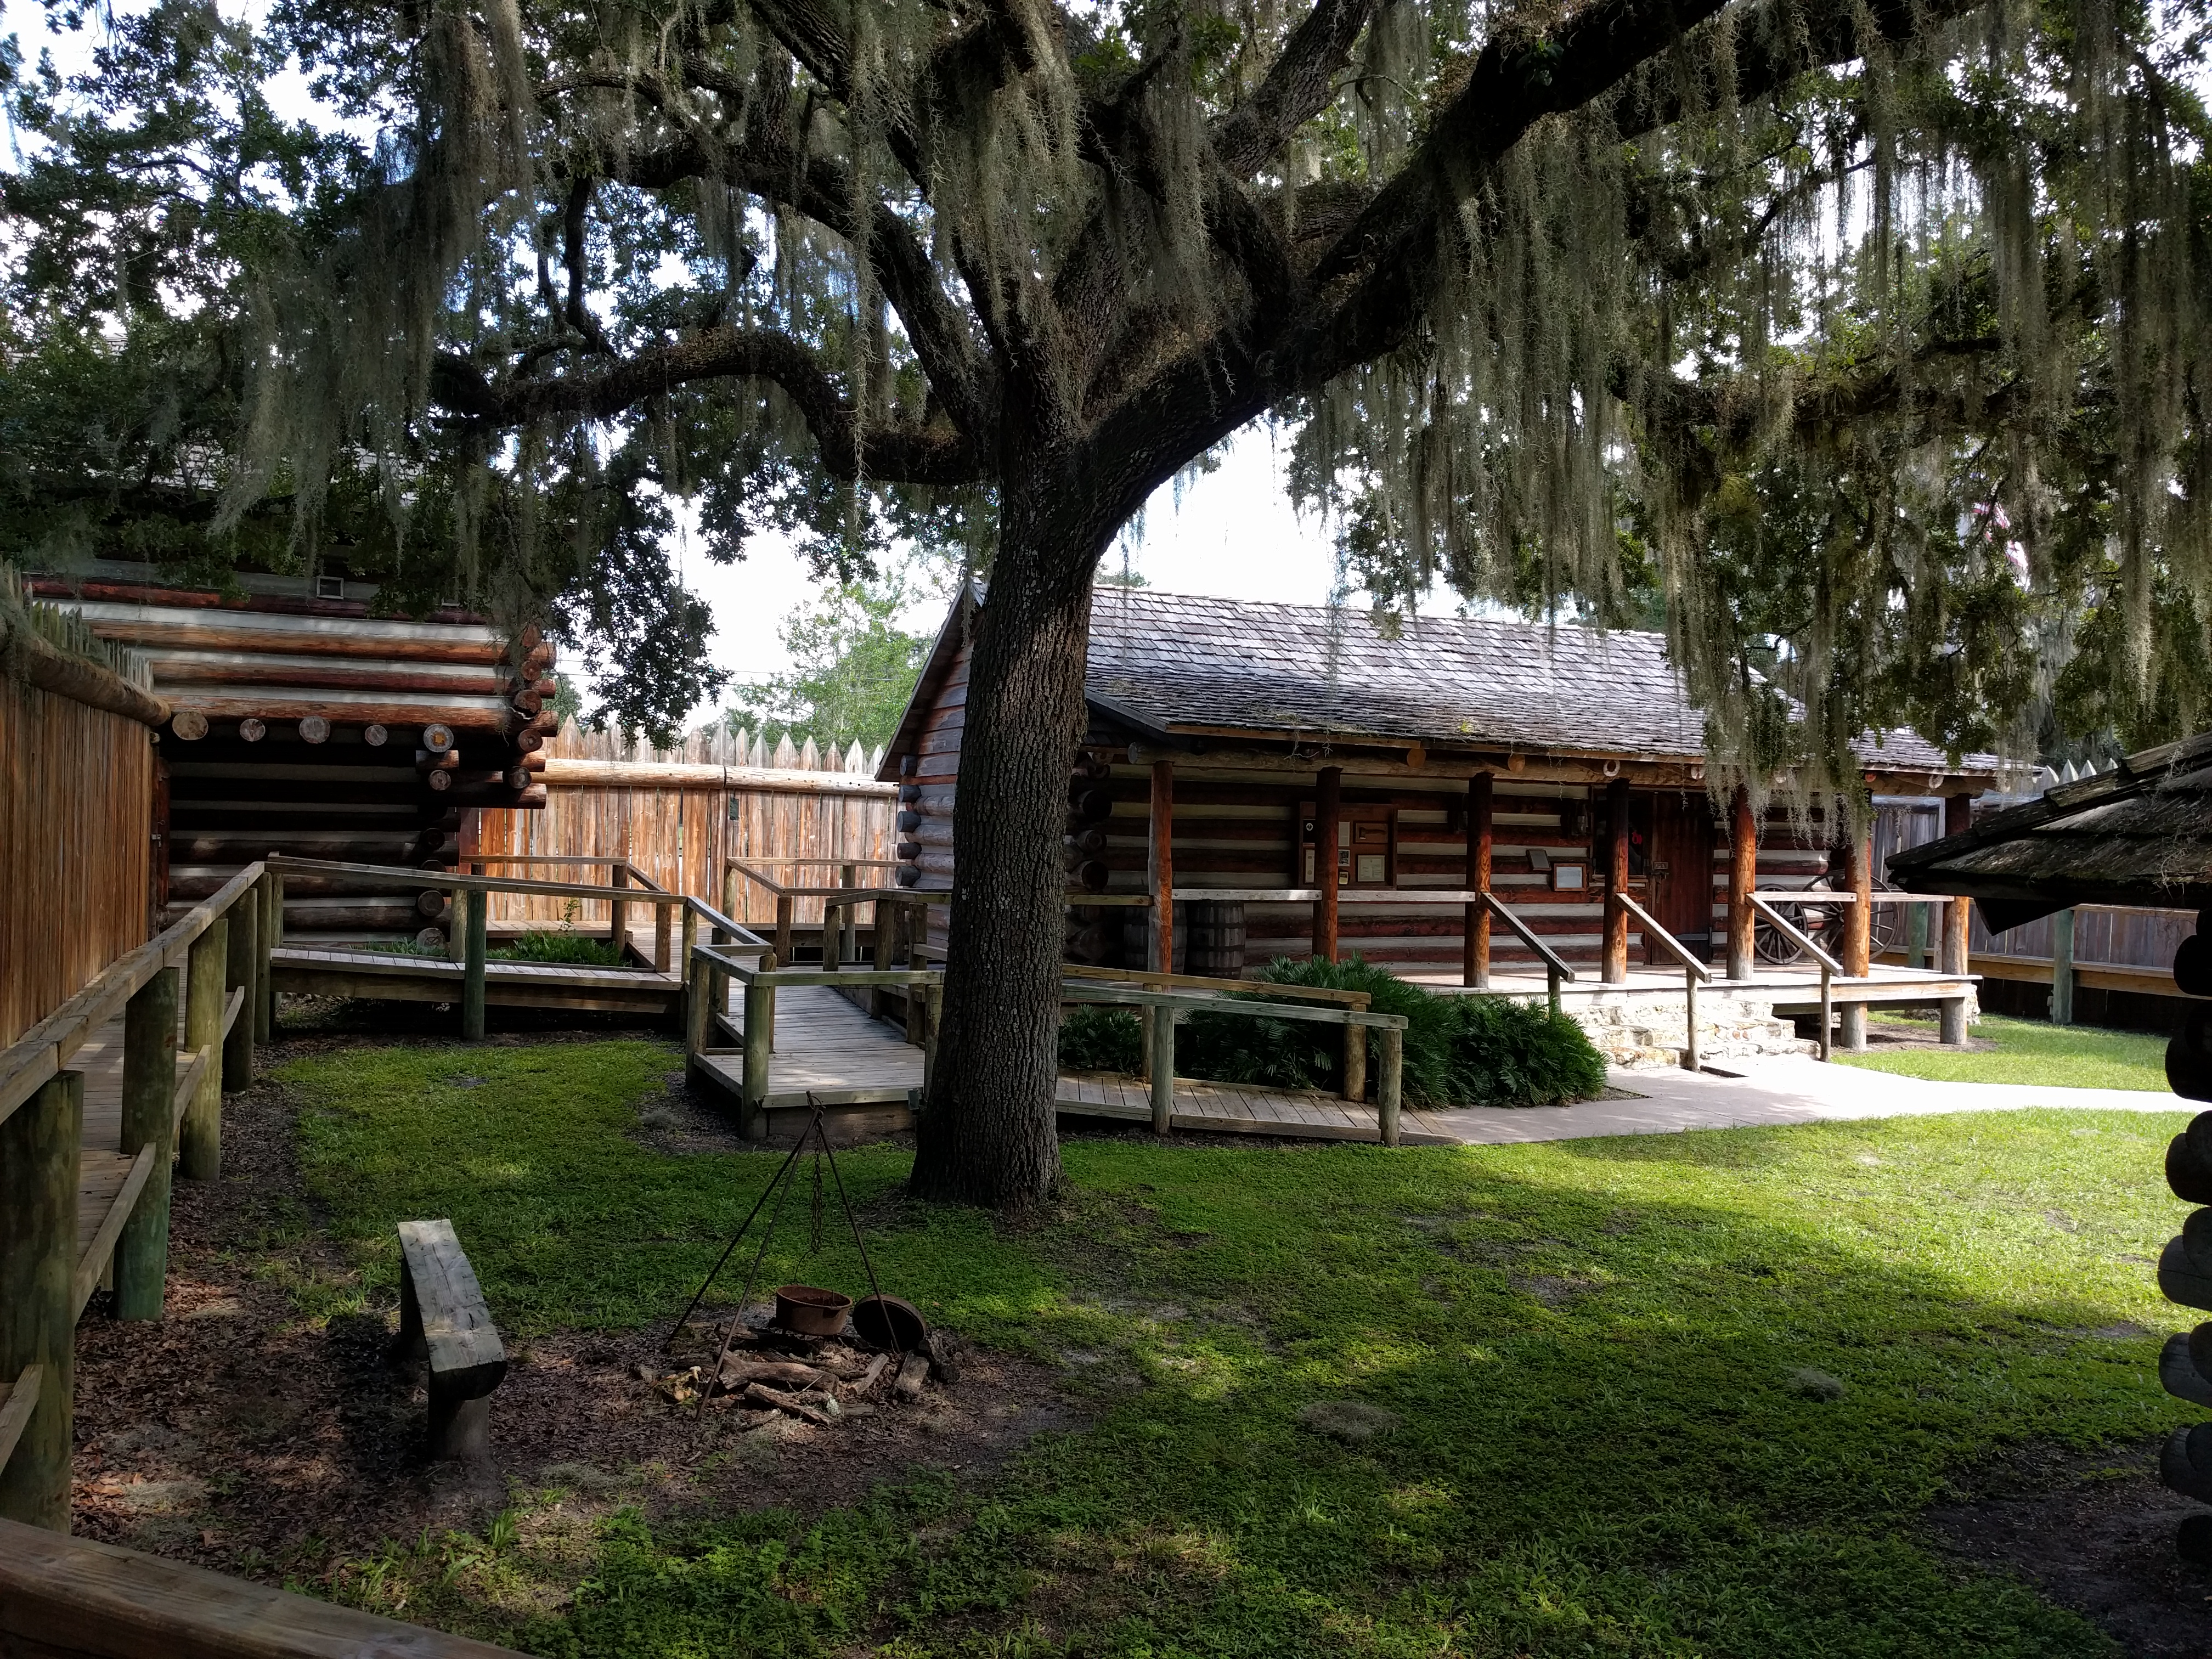 Replica of Fort Christmas in Christmas, Florida